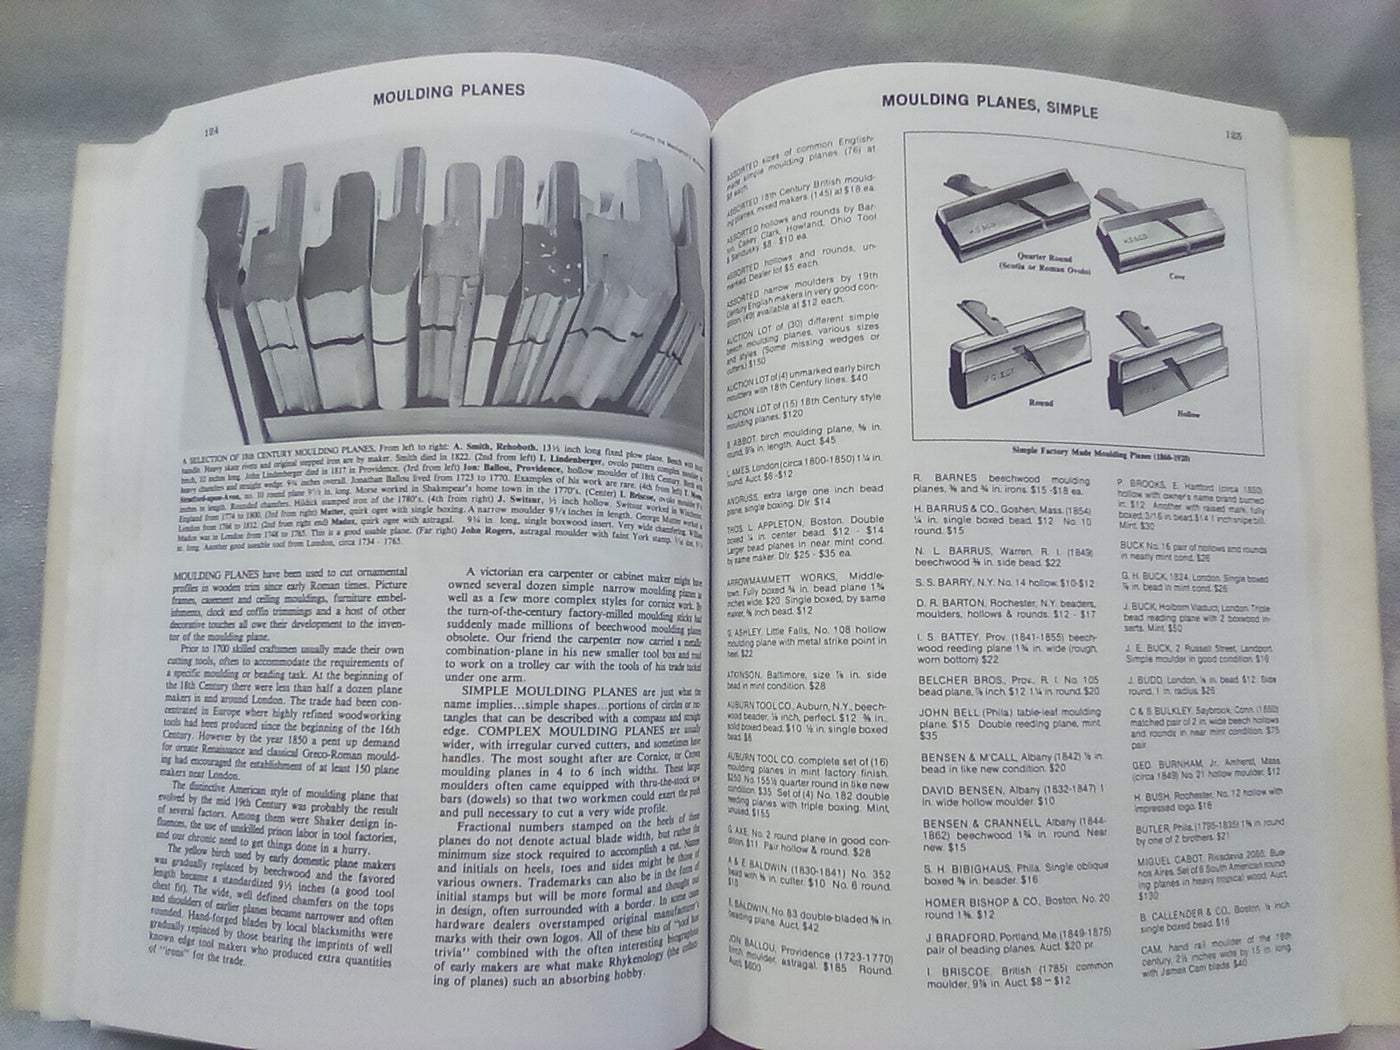 The Antique Tool Collectors Guide to Value (1991) by Ronald Barlow